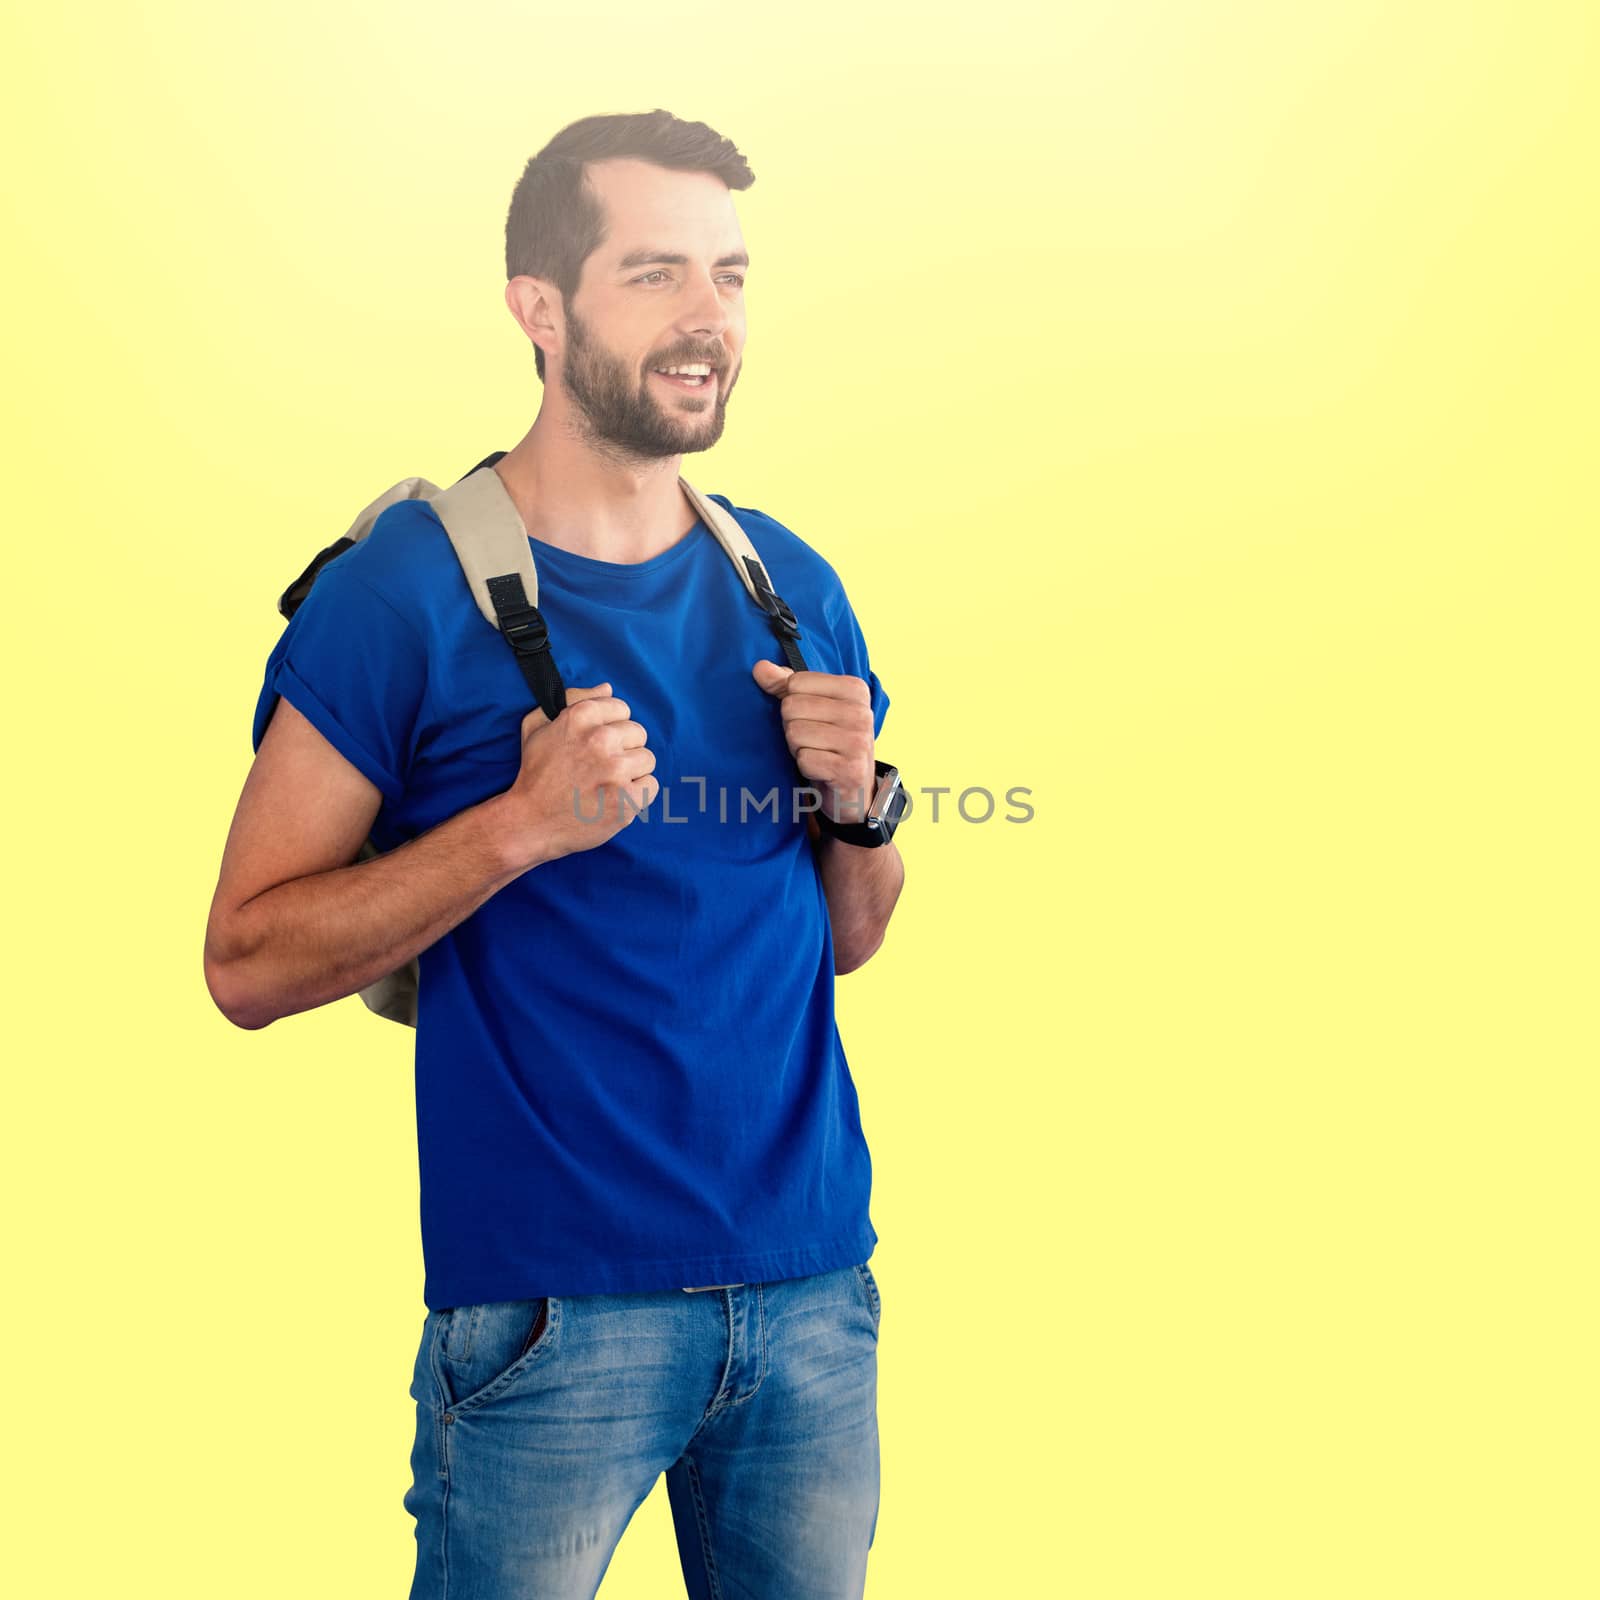 Composite image of man with backpack against white background by Wavebreakmedia